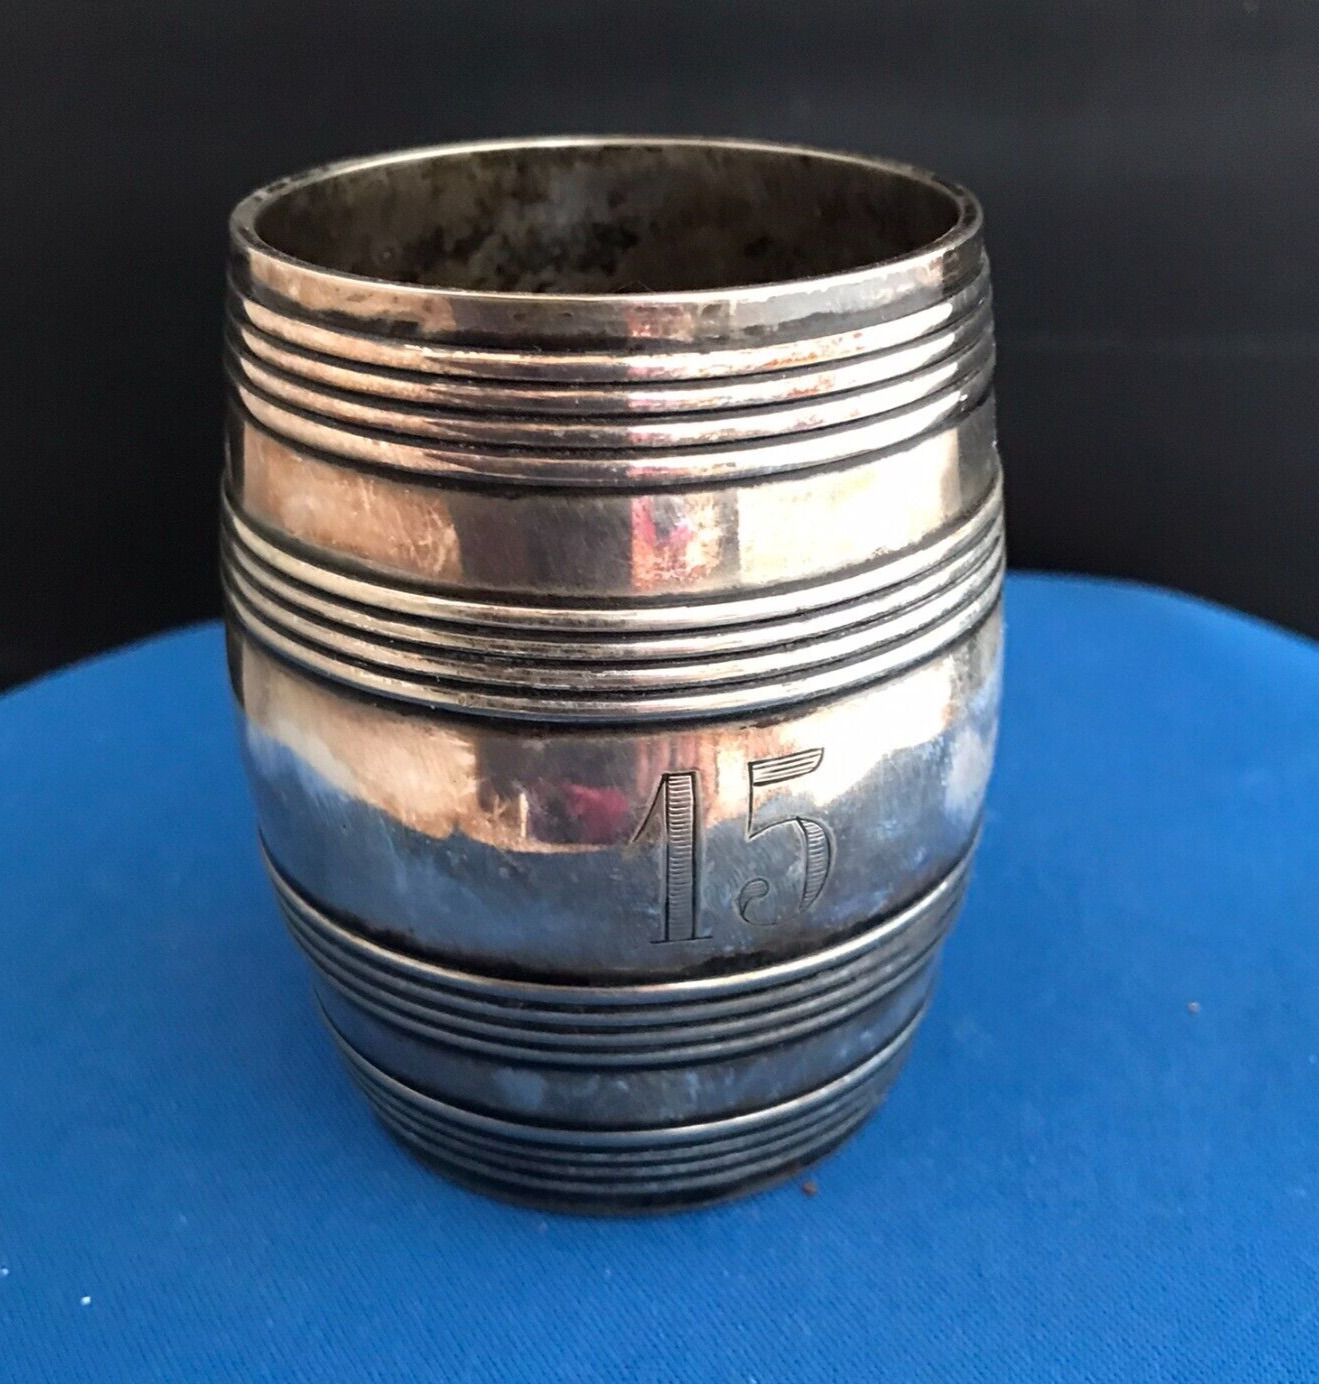 Barrel Shaped Silver Plated Spirit Measure by Wiskemann (late 18th/early 19th)